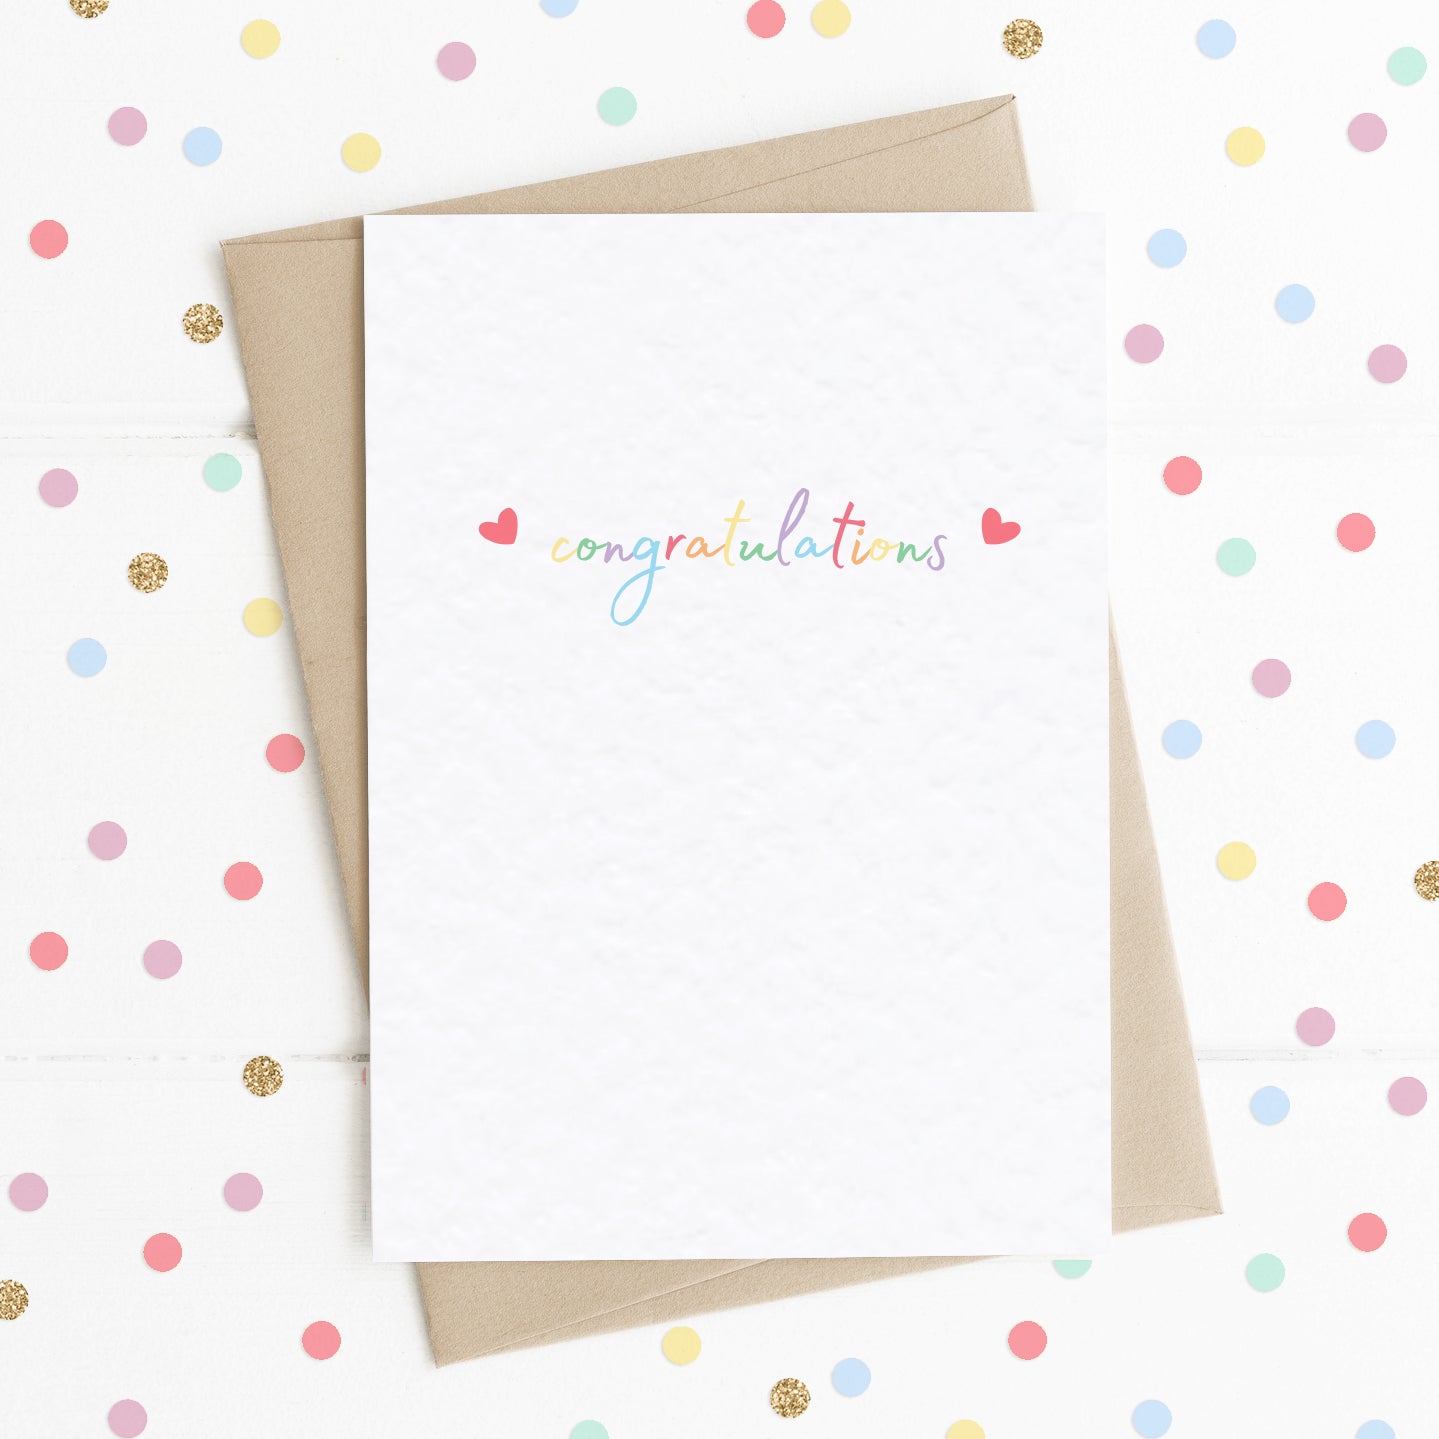 A cute A6 celebration card with the message "Congratulations" in colourful rainbow type, with two reds hearts either side.